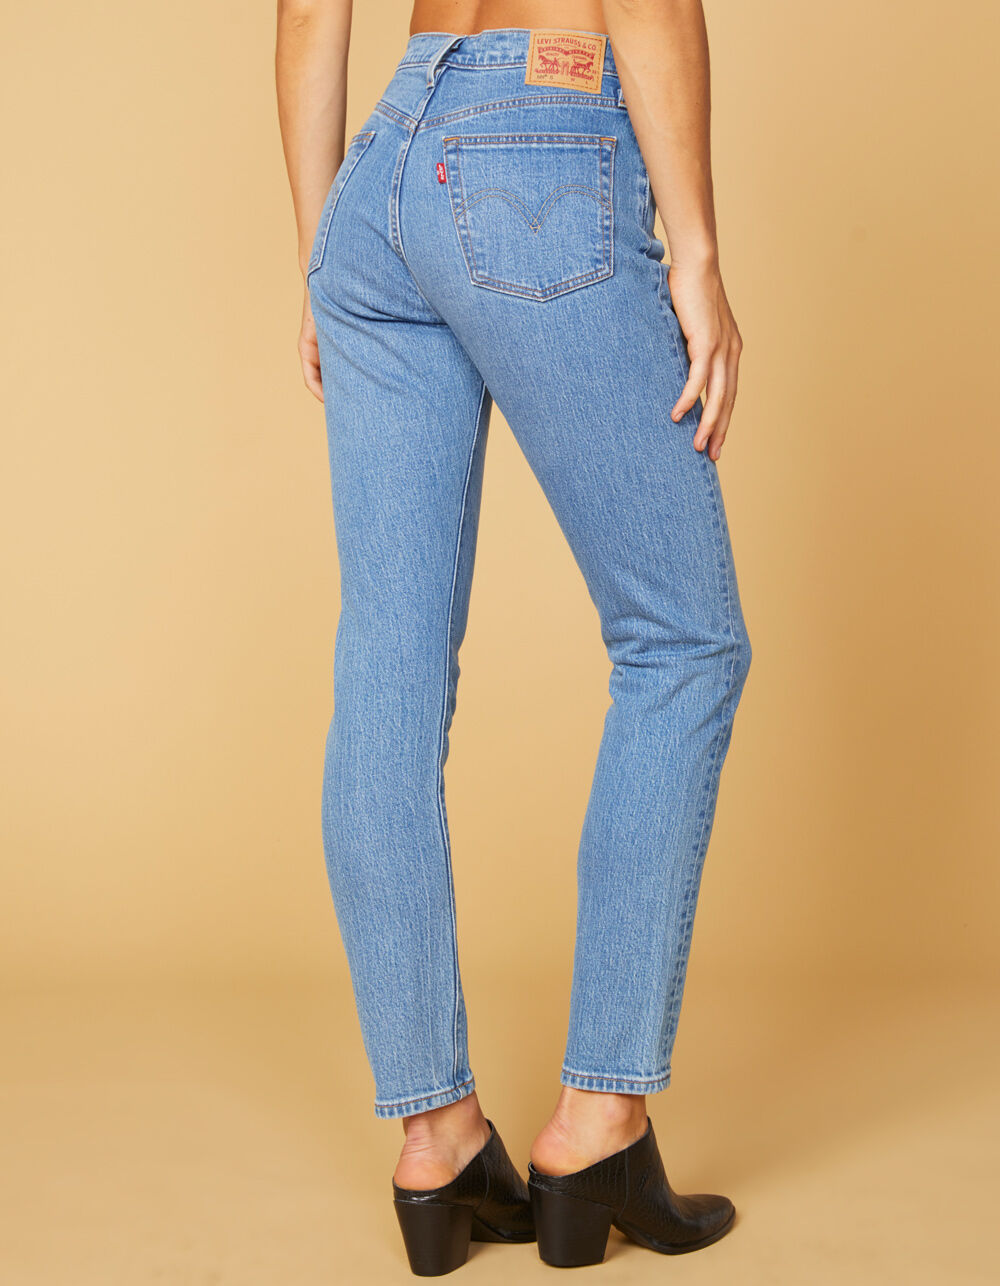 LEVI'S 501 Jive Love Womens Skinny Jeans image number 4